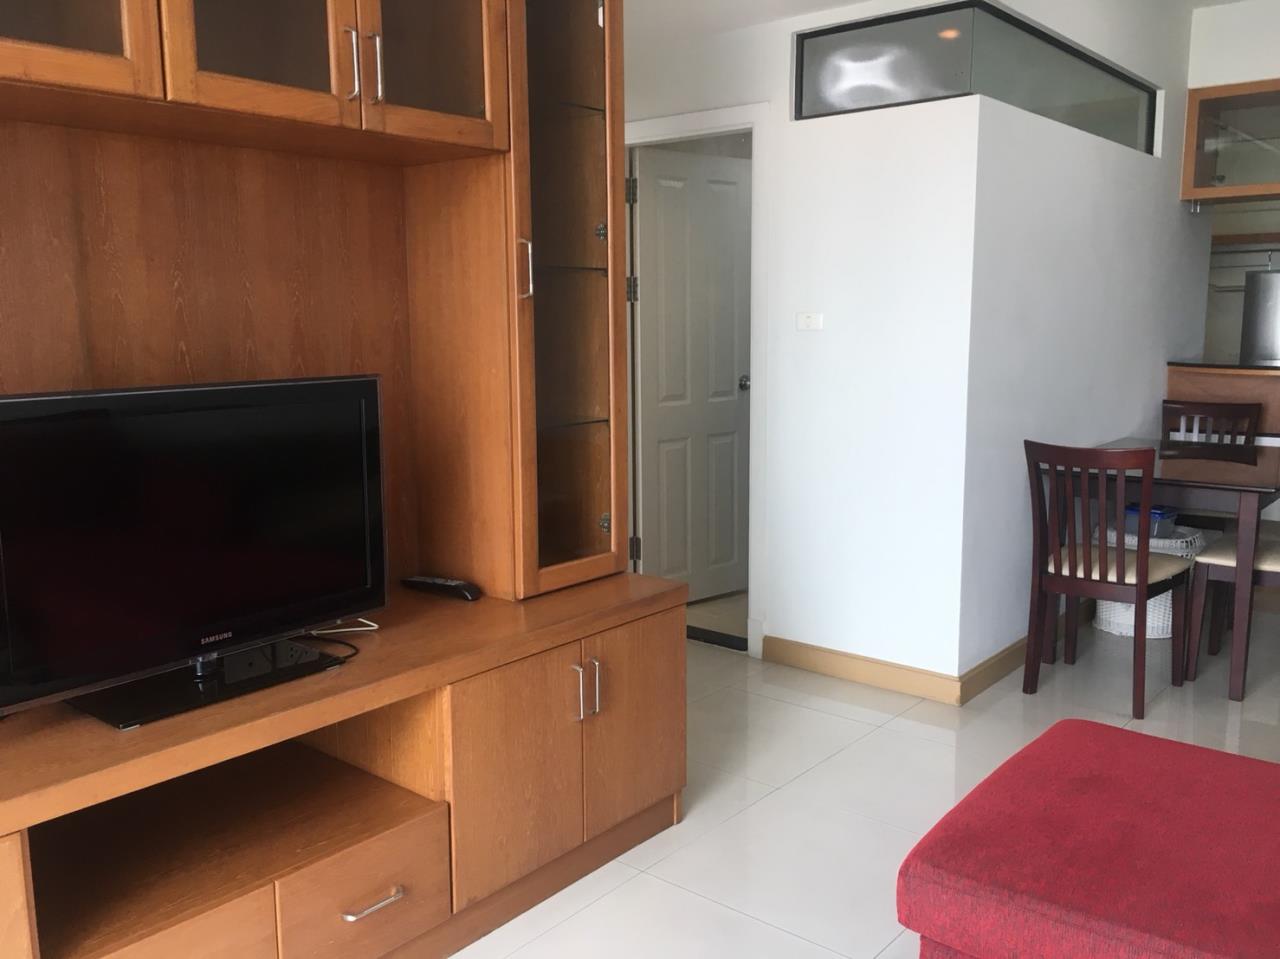 Quality Life Property Agency's 2 Bed For Rent At Supalai Premier Asoke, Modern And Nice Decorated Room On High Floor 20 17